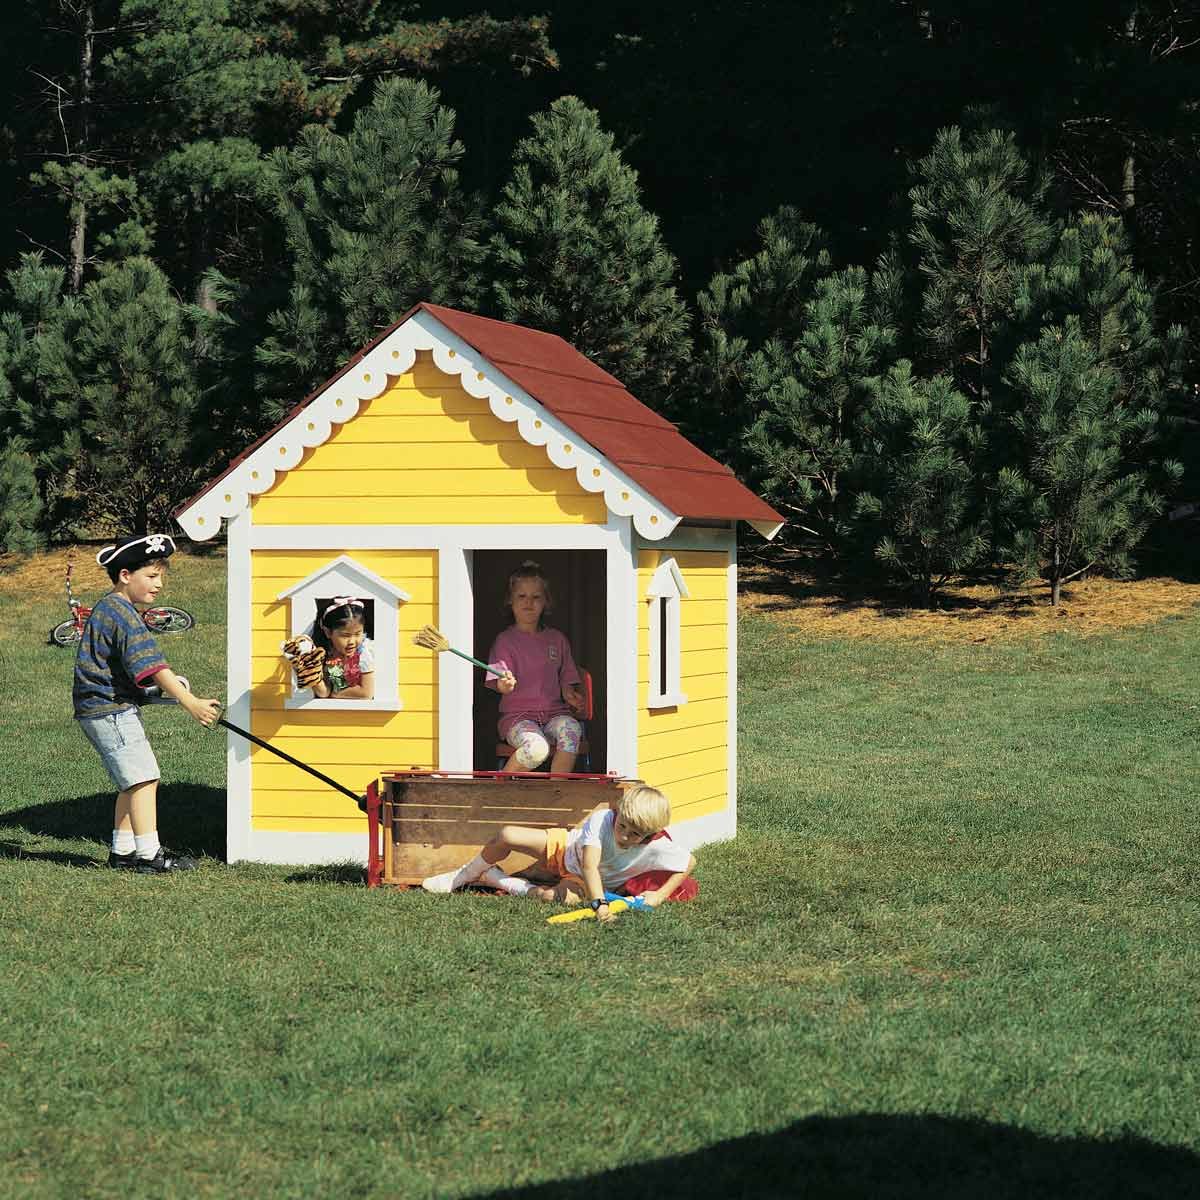 Do It Yourself How to Build a Playhouse The Family Handyman